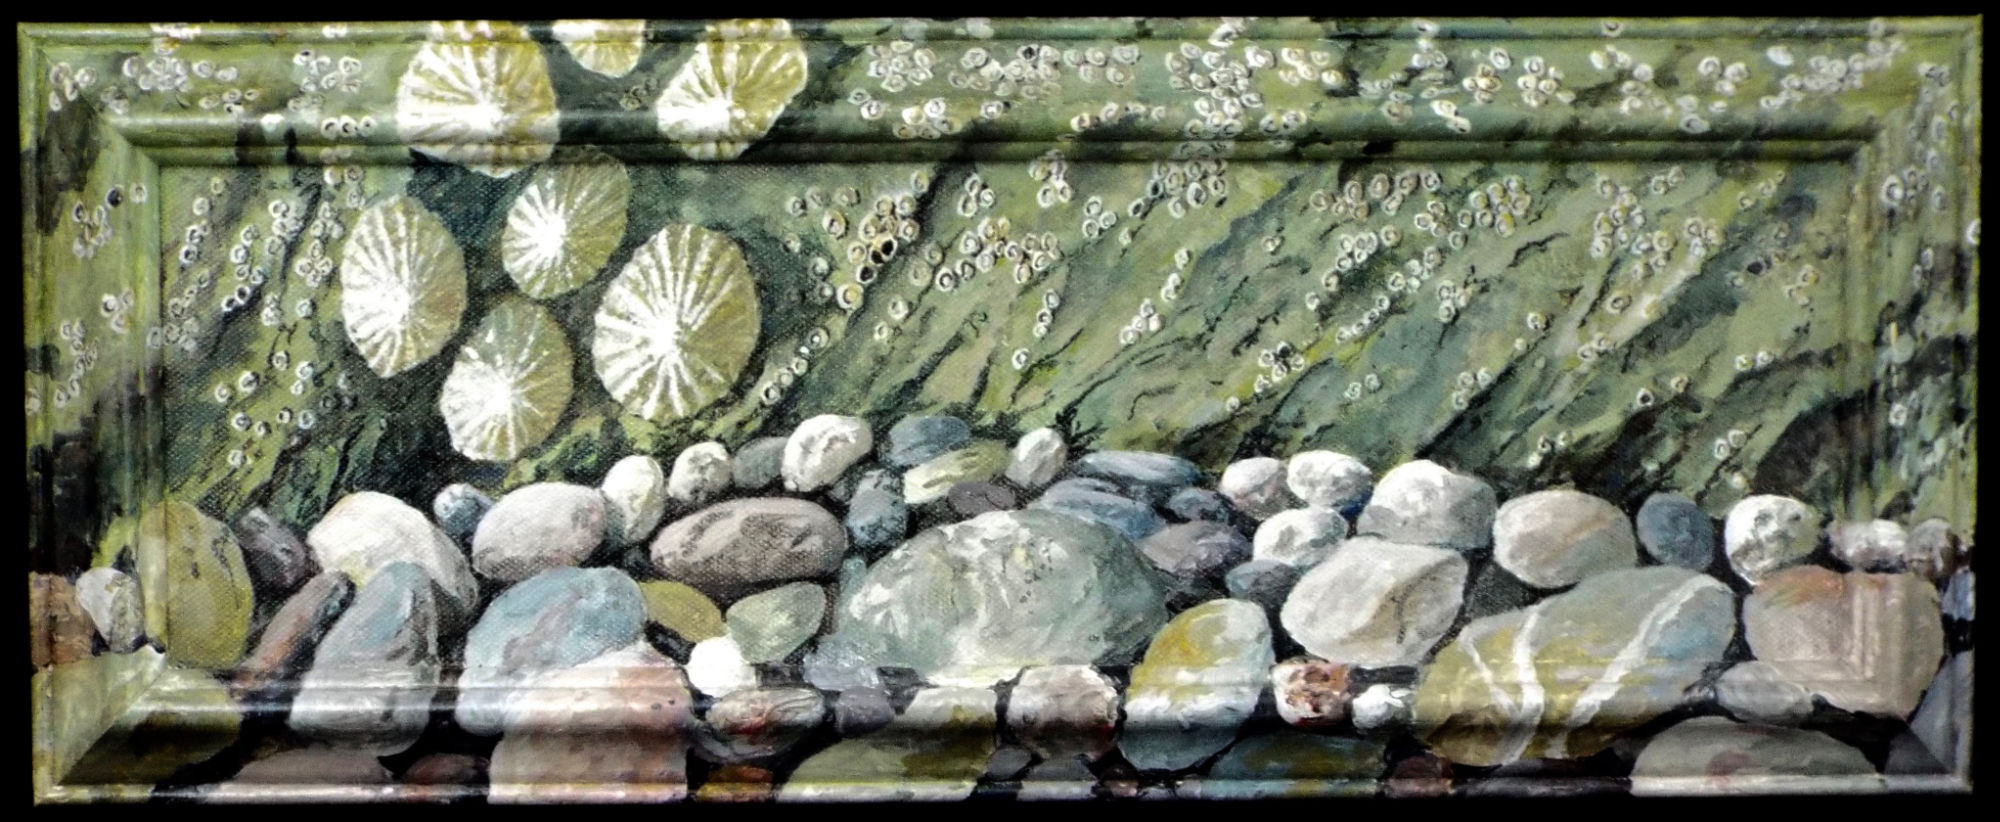 Limpets and Barnacles by Richard Woodgate.